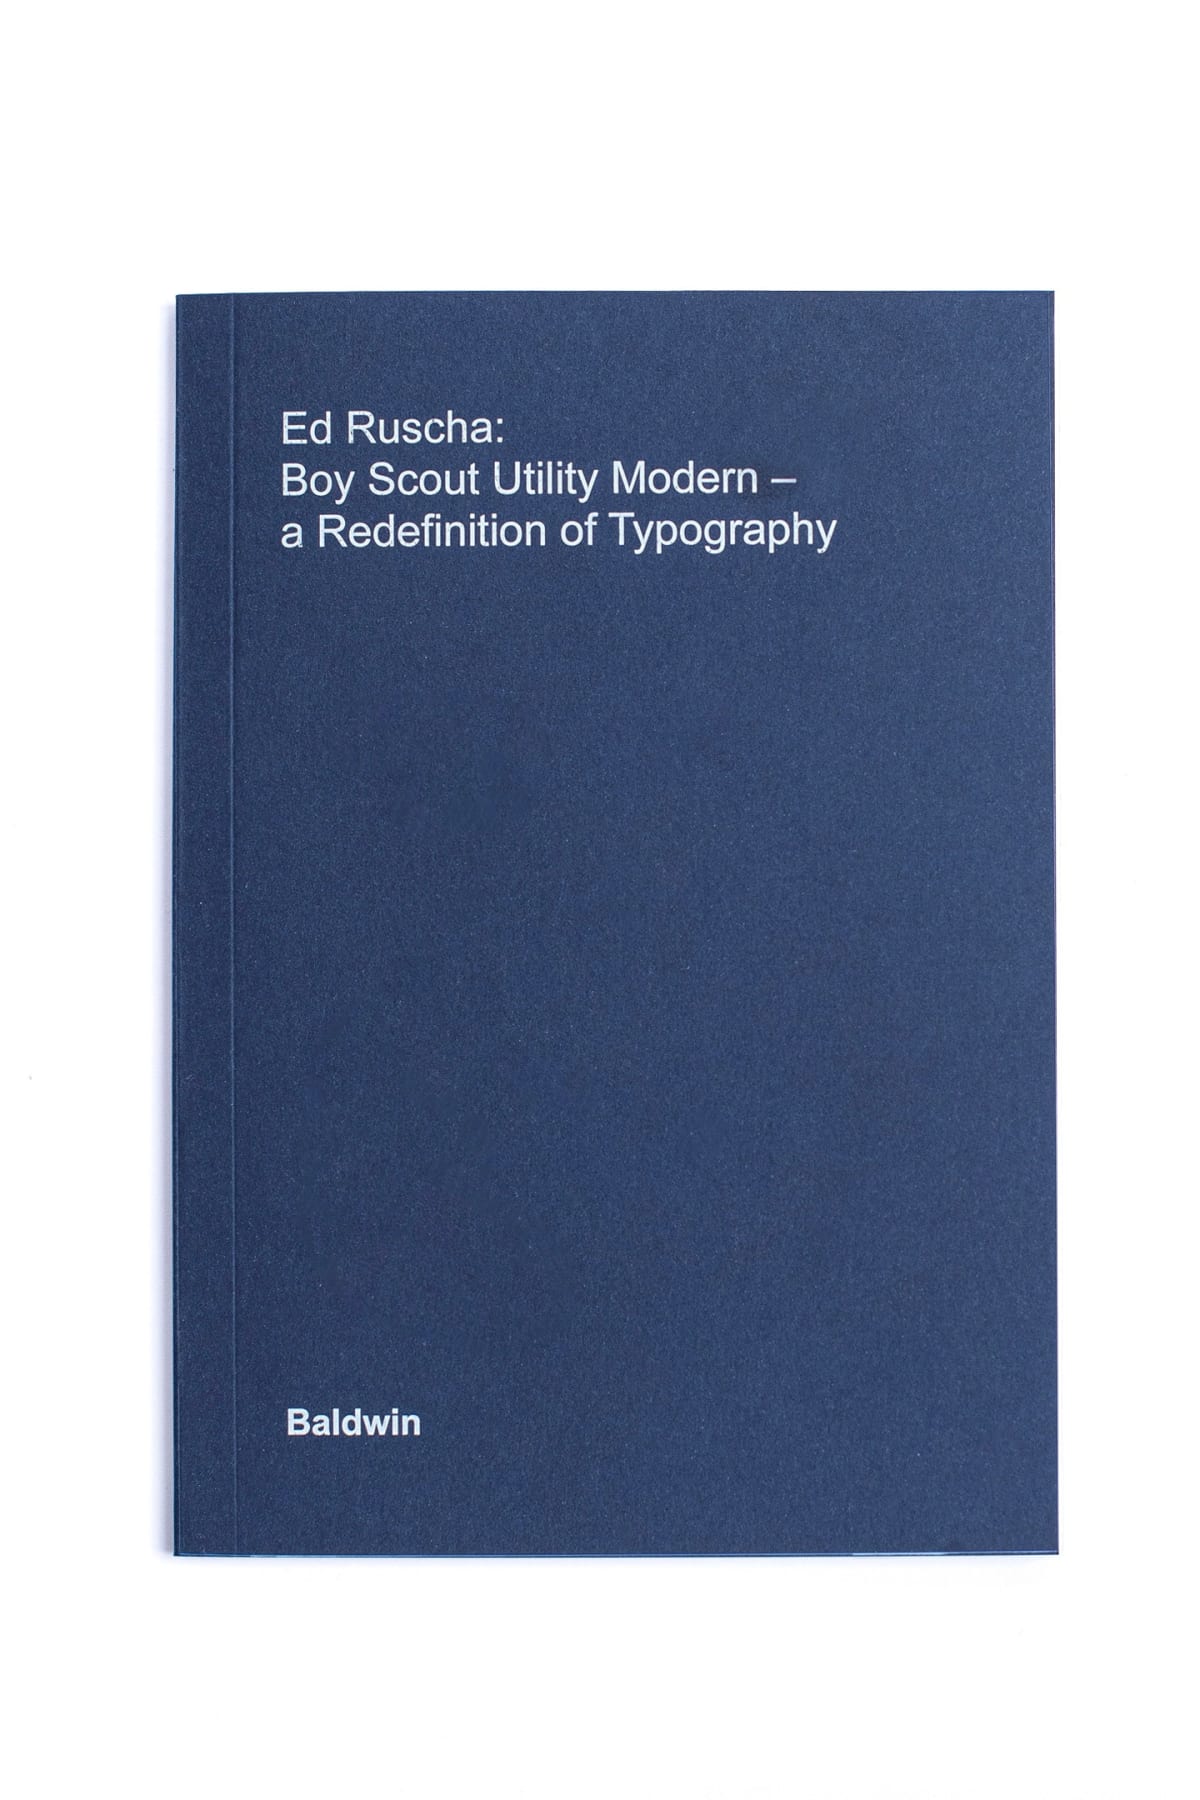 Ed Ruscha: Boy Scout Utility Modern- a redefinition of Typography